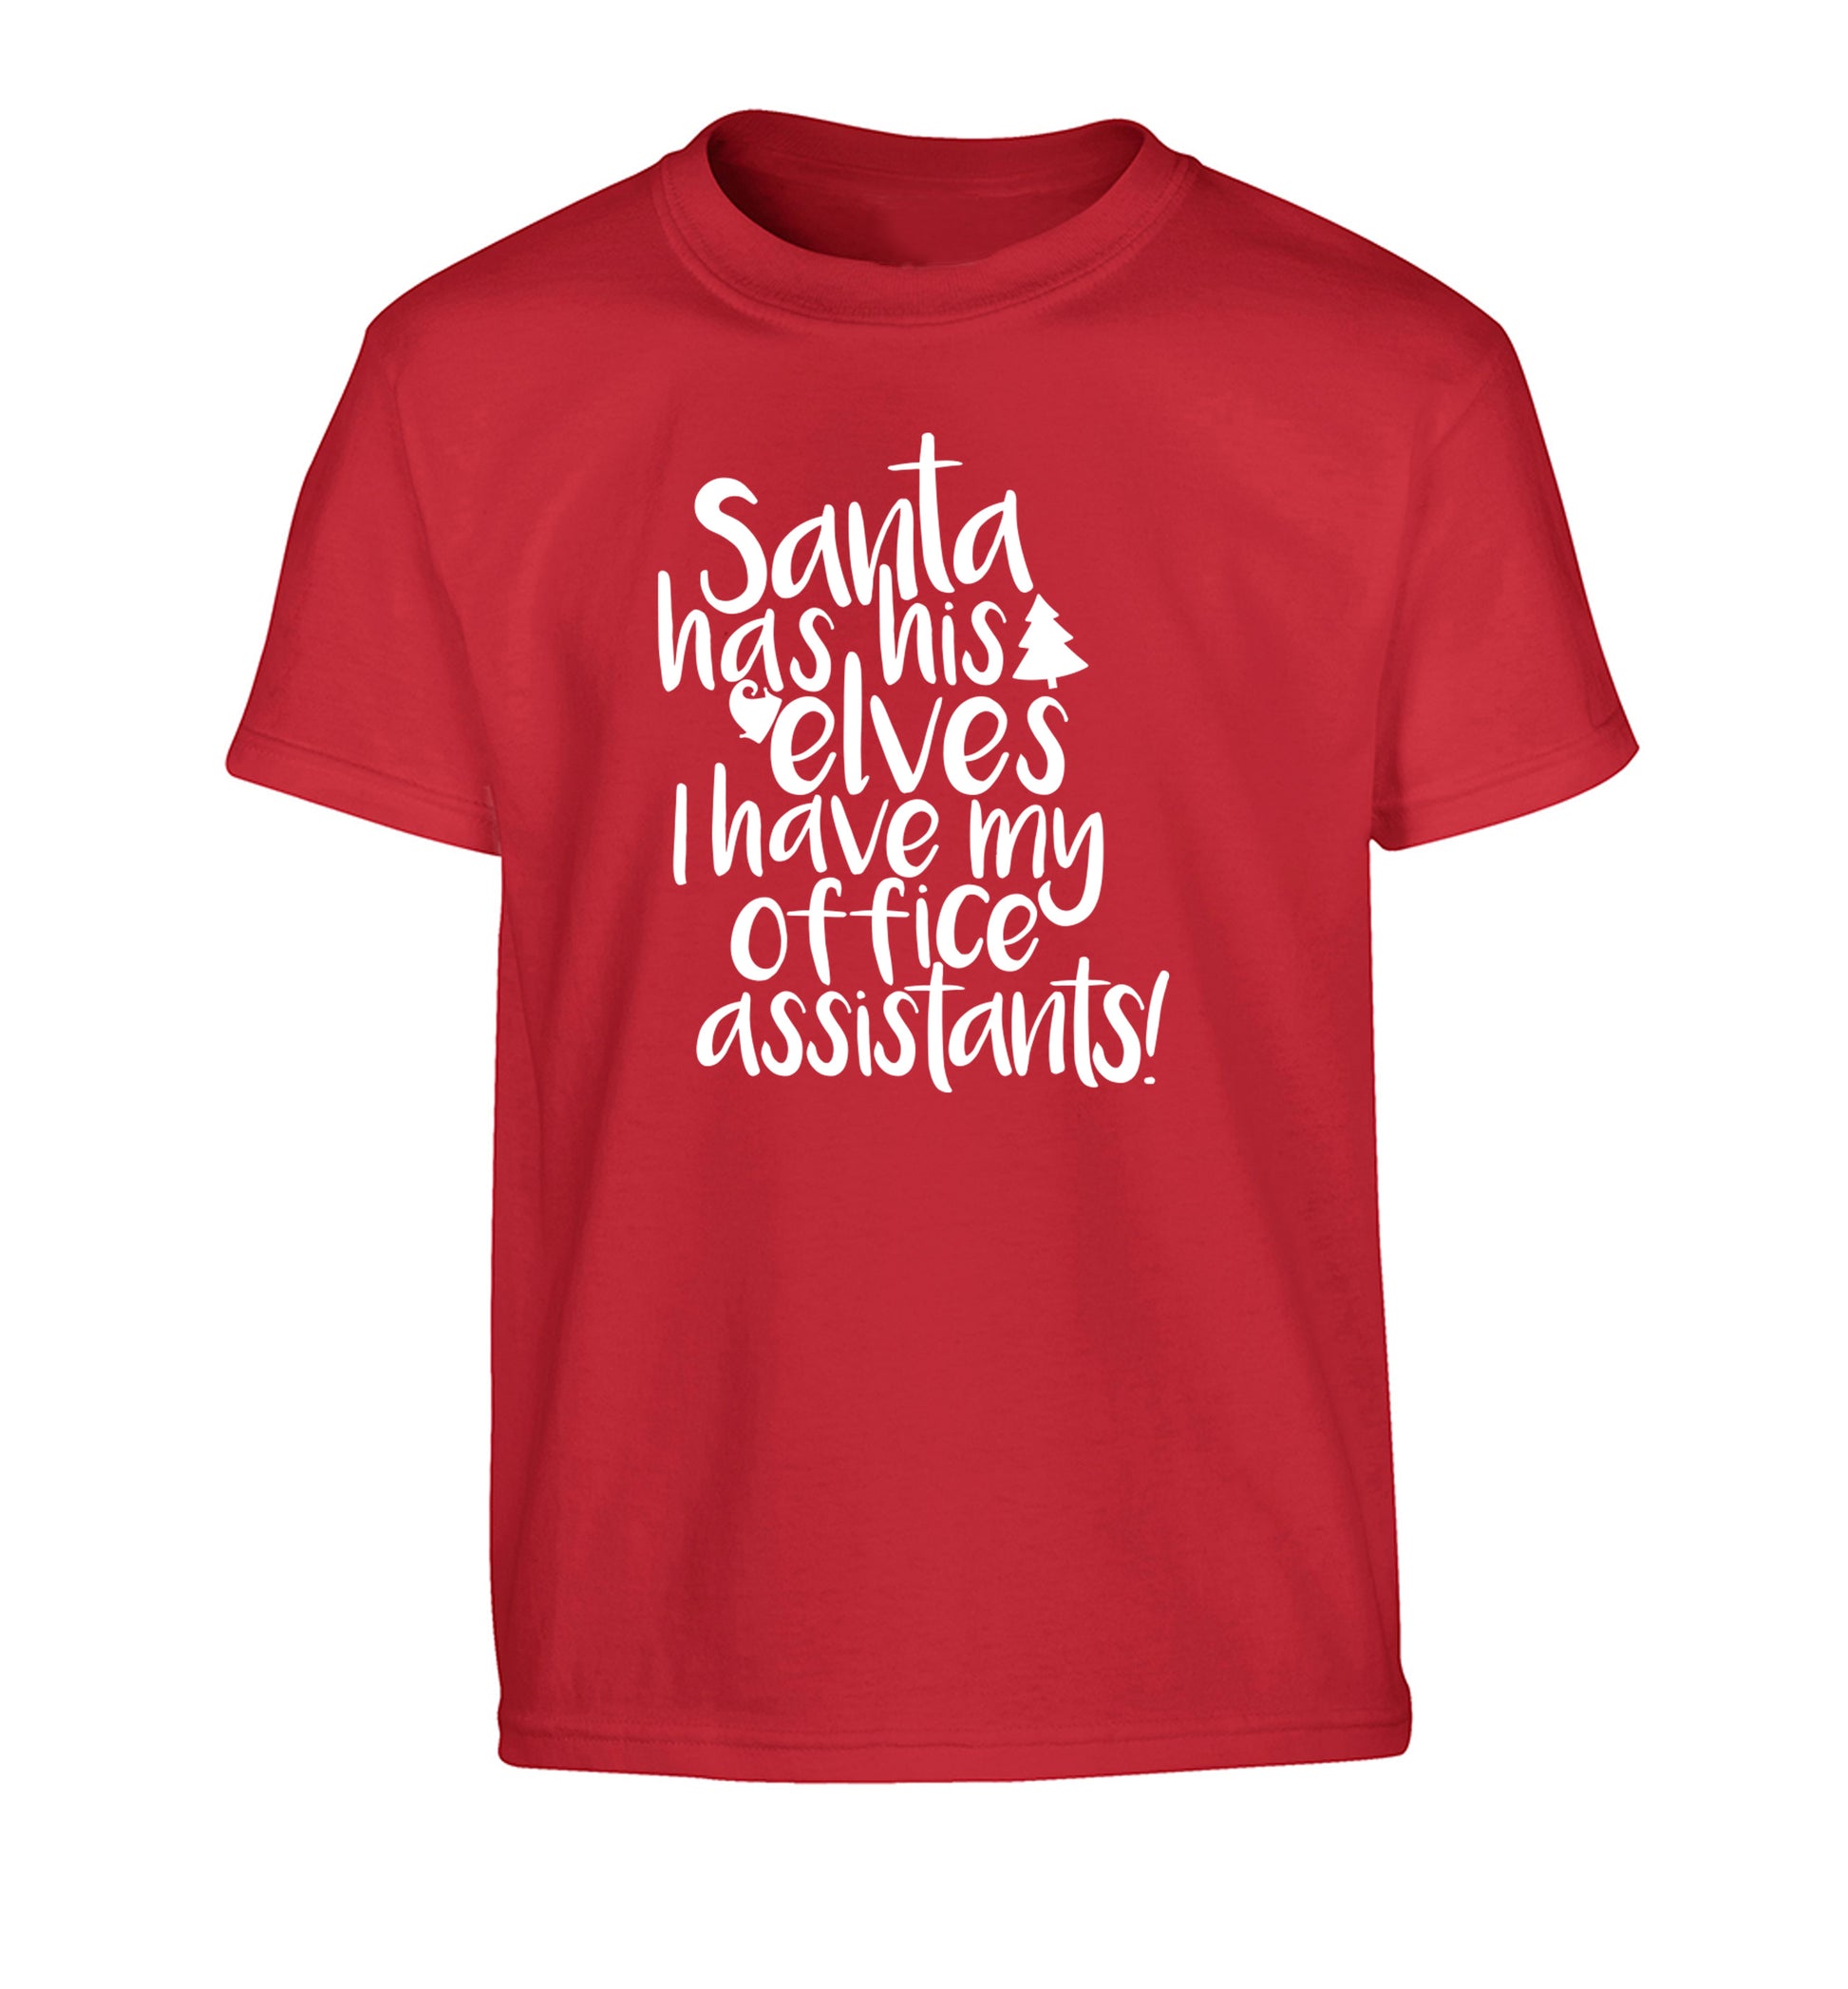 Santa has his elves I have my office assistants Children's red Tshirt 12-14 Years